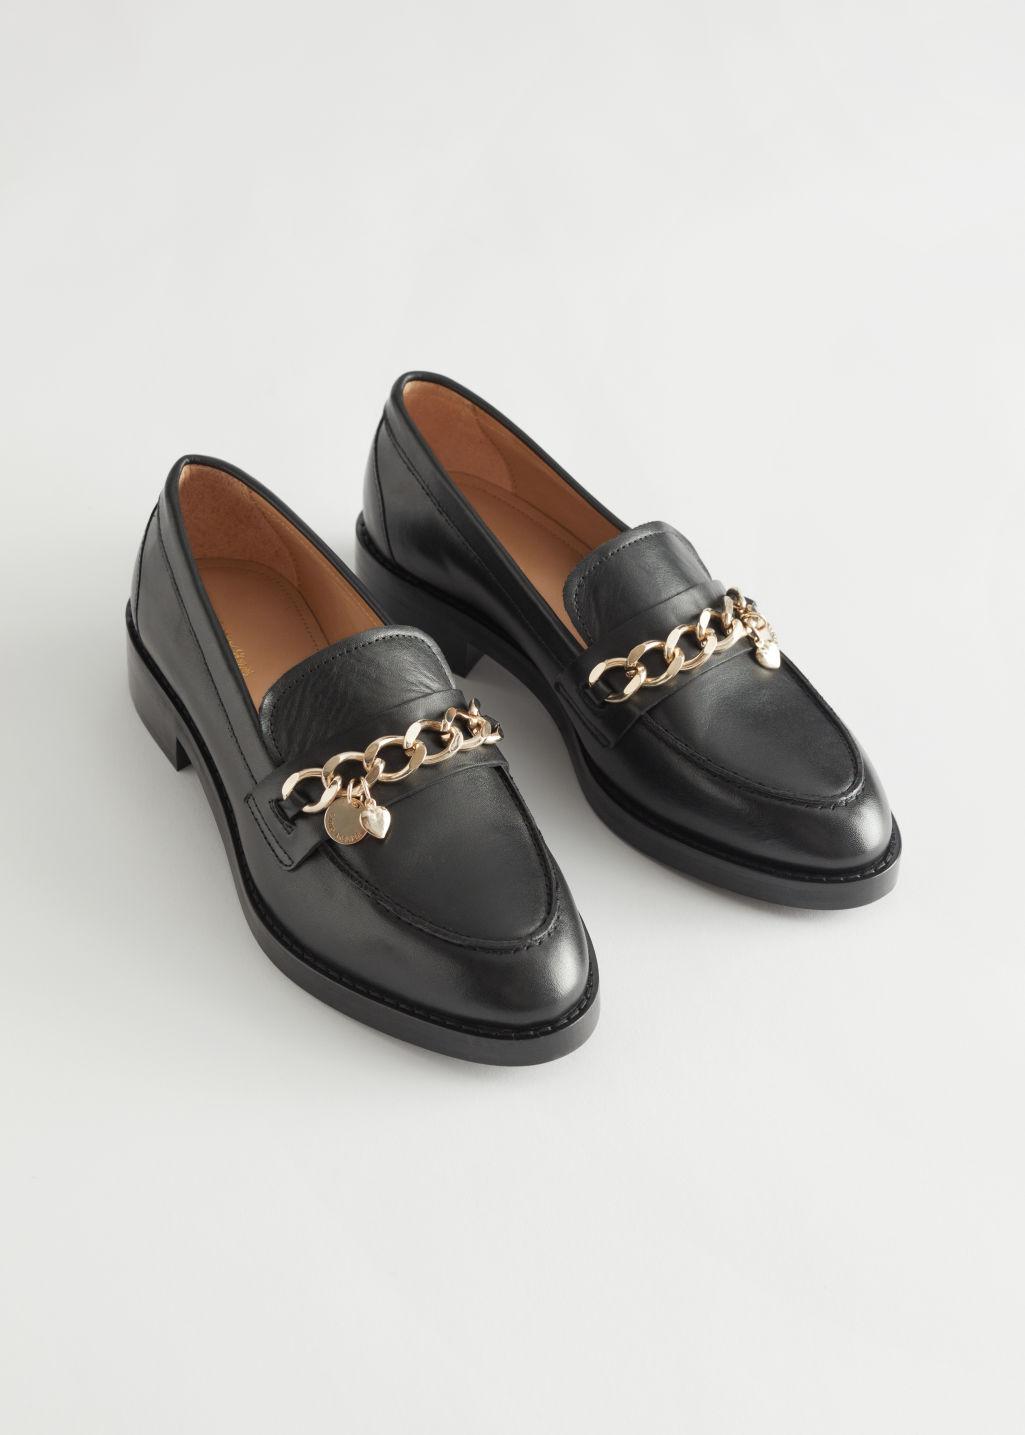 Andesbjergene koloni Plante & Other Stories Chain Embellished Leather Loafers in Black | Lyst